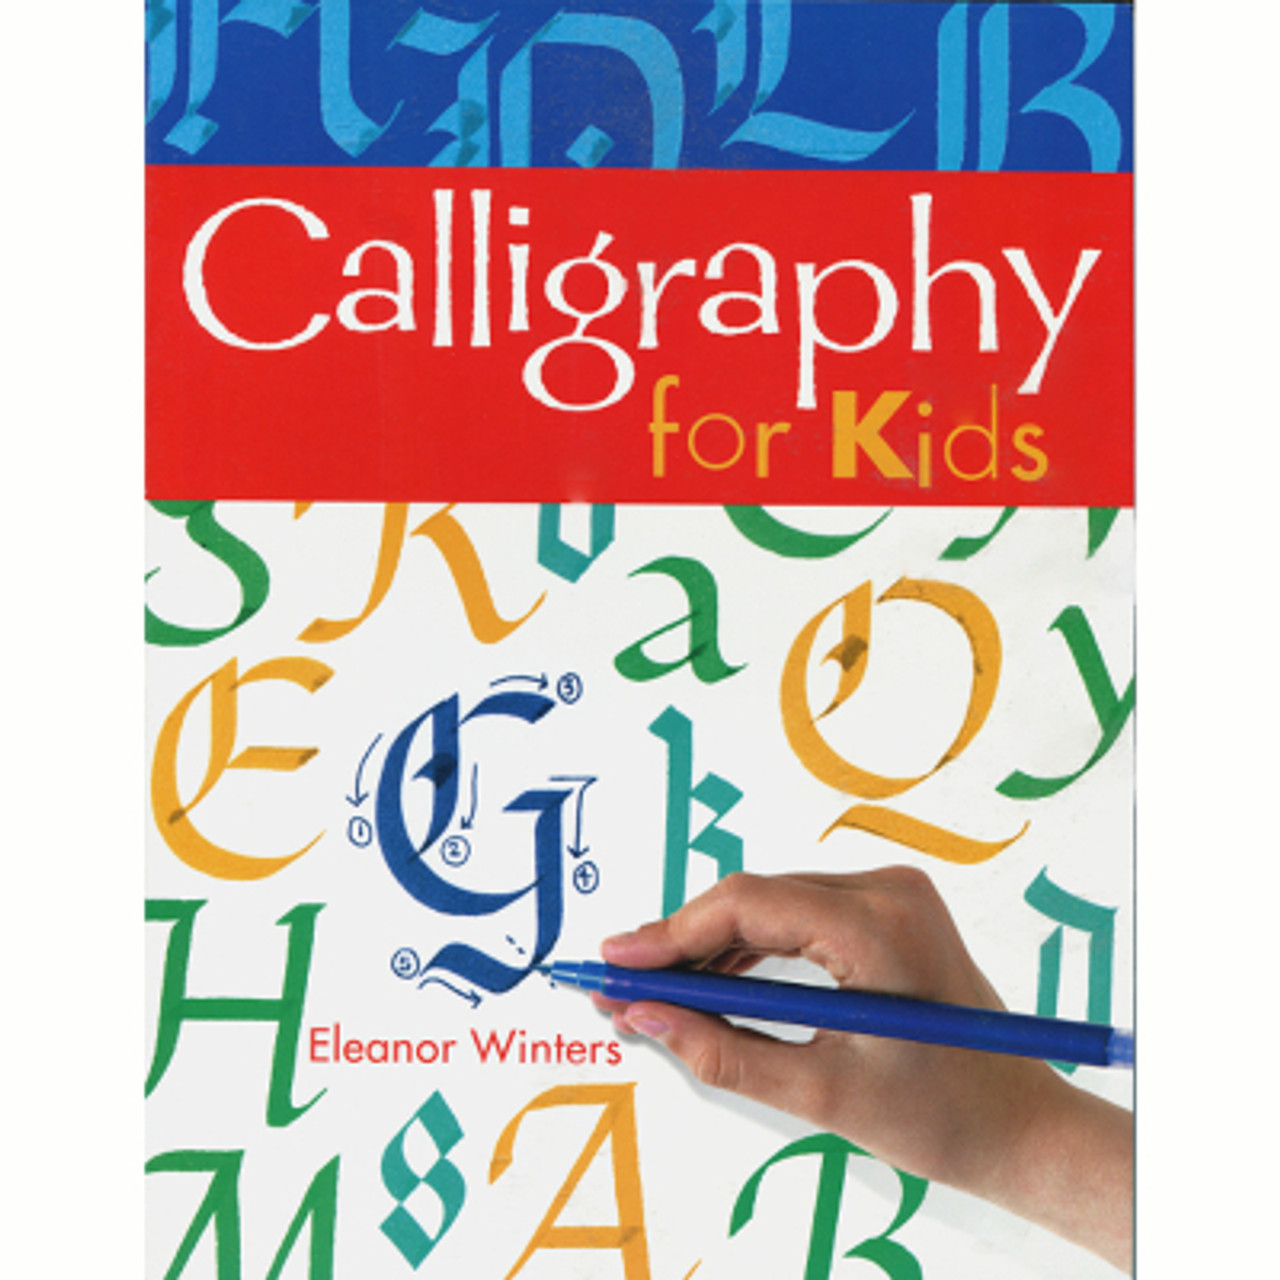 Calligraphy for Kids by Eleanor Winters - John Neal Books